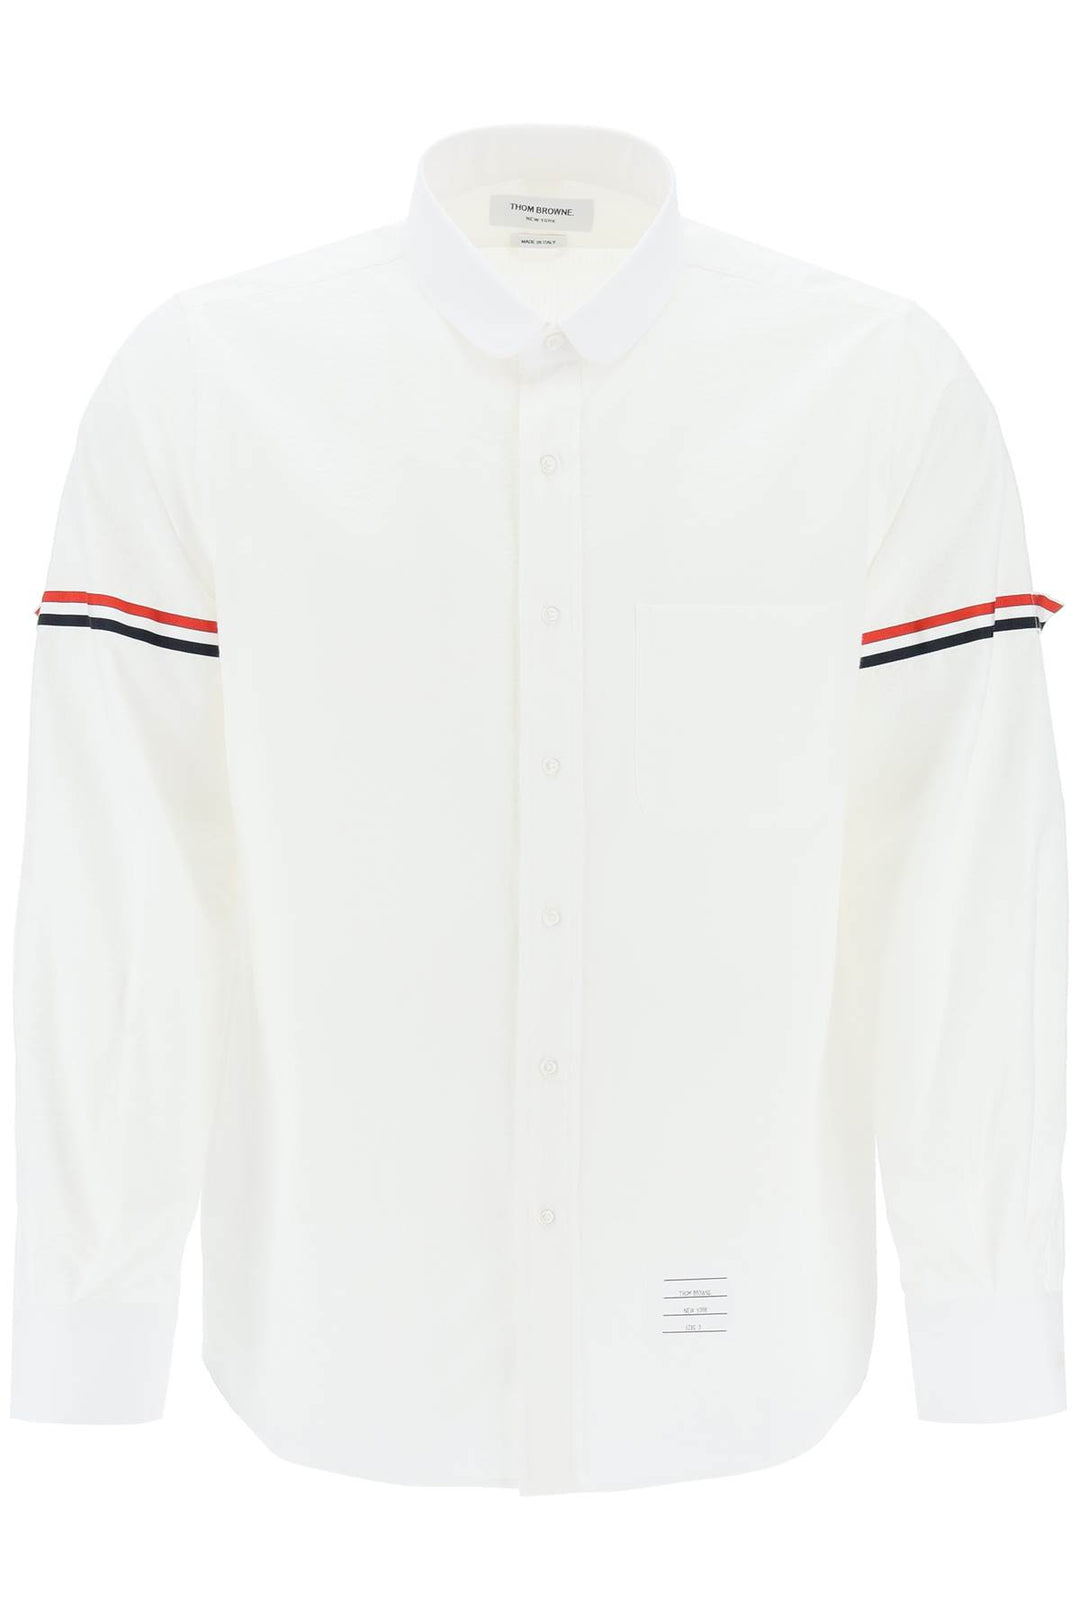 Thom Browne Seersucker Shirt With Rounded Collar   Bianco